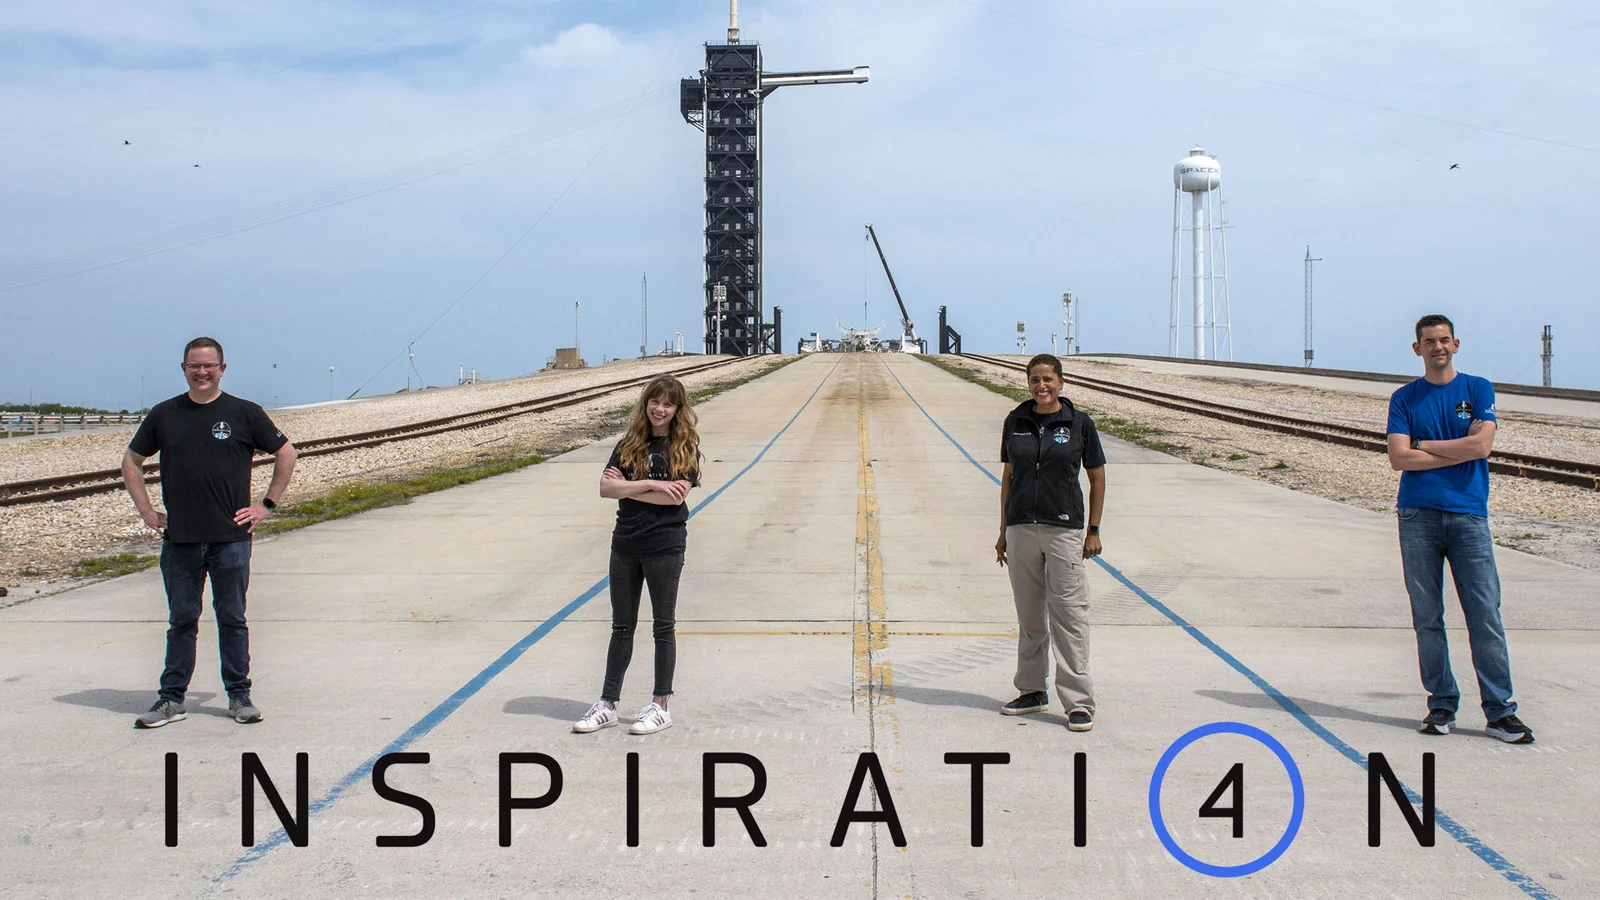 Inspiration4 Crew - Historic Launchpad 39A - SpaceX